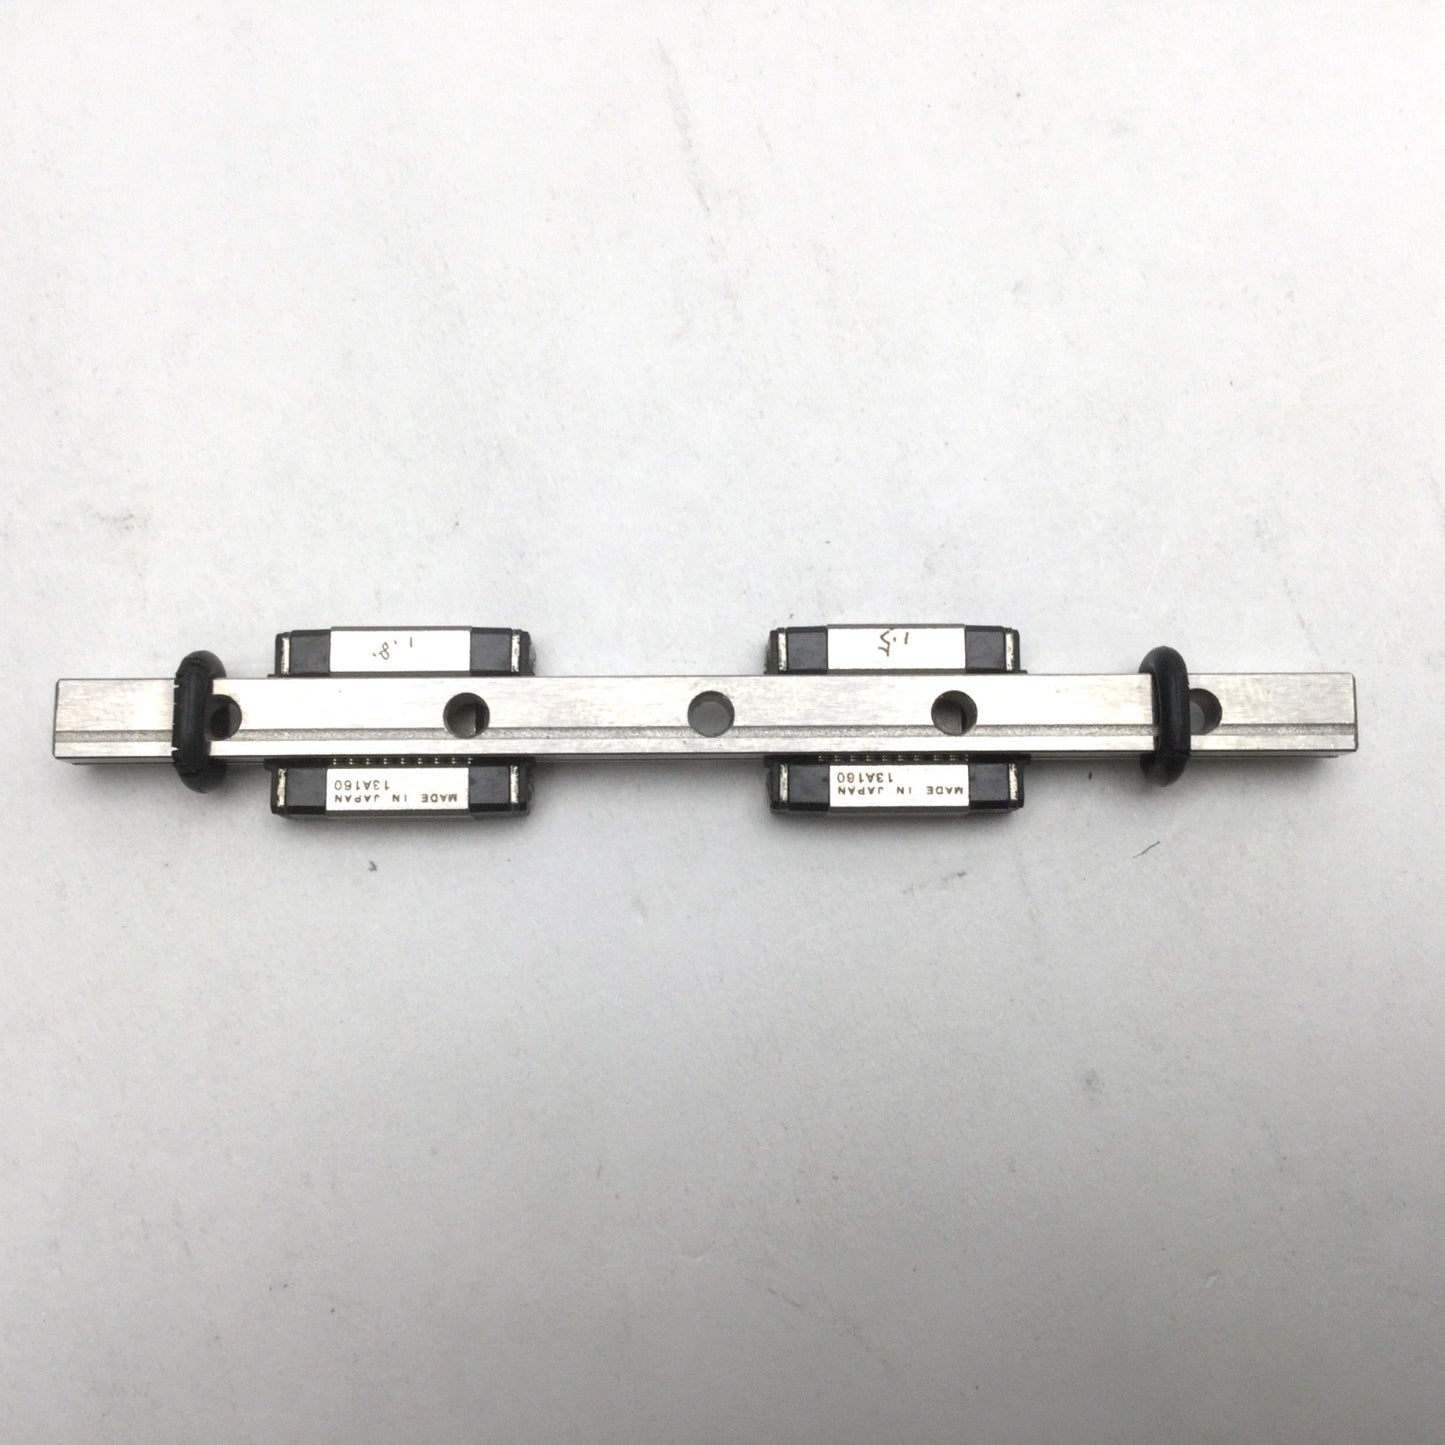 New Other THK 2RSR5MUU+80LM Miniature Linear Rail With 2X RSR5 Carriages, Length: 80mm